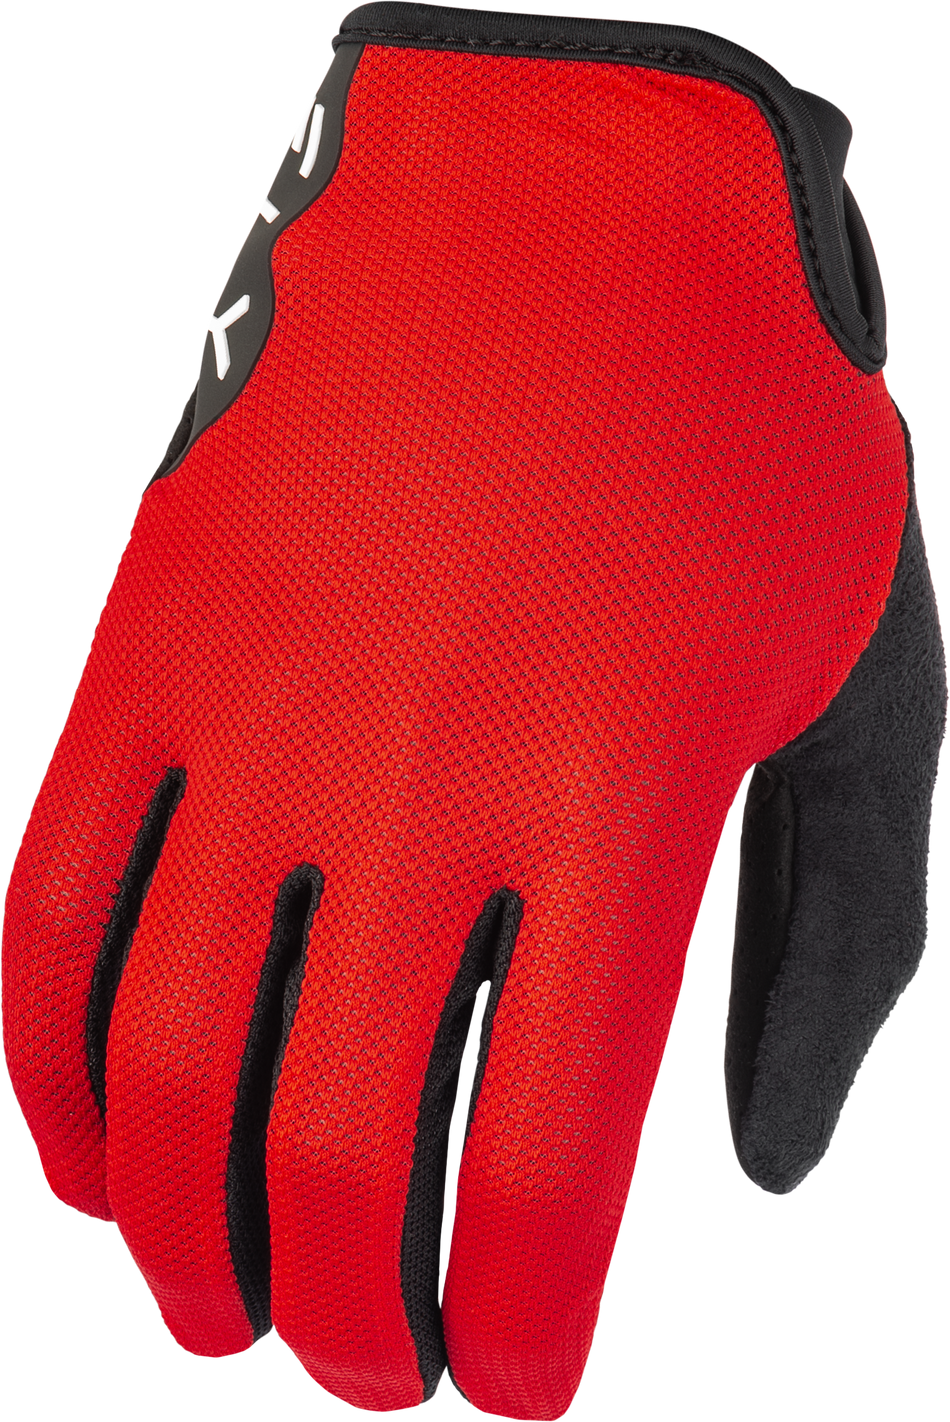 FLY RACING Mesh Gloves Red Md 375-337M